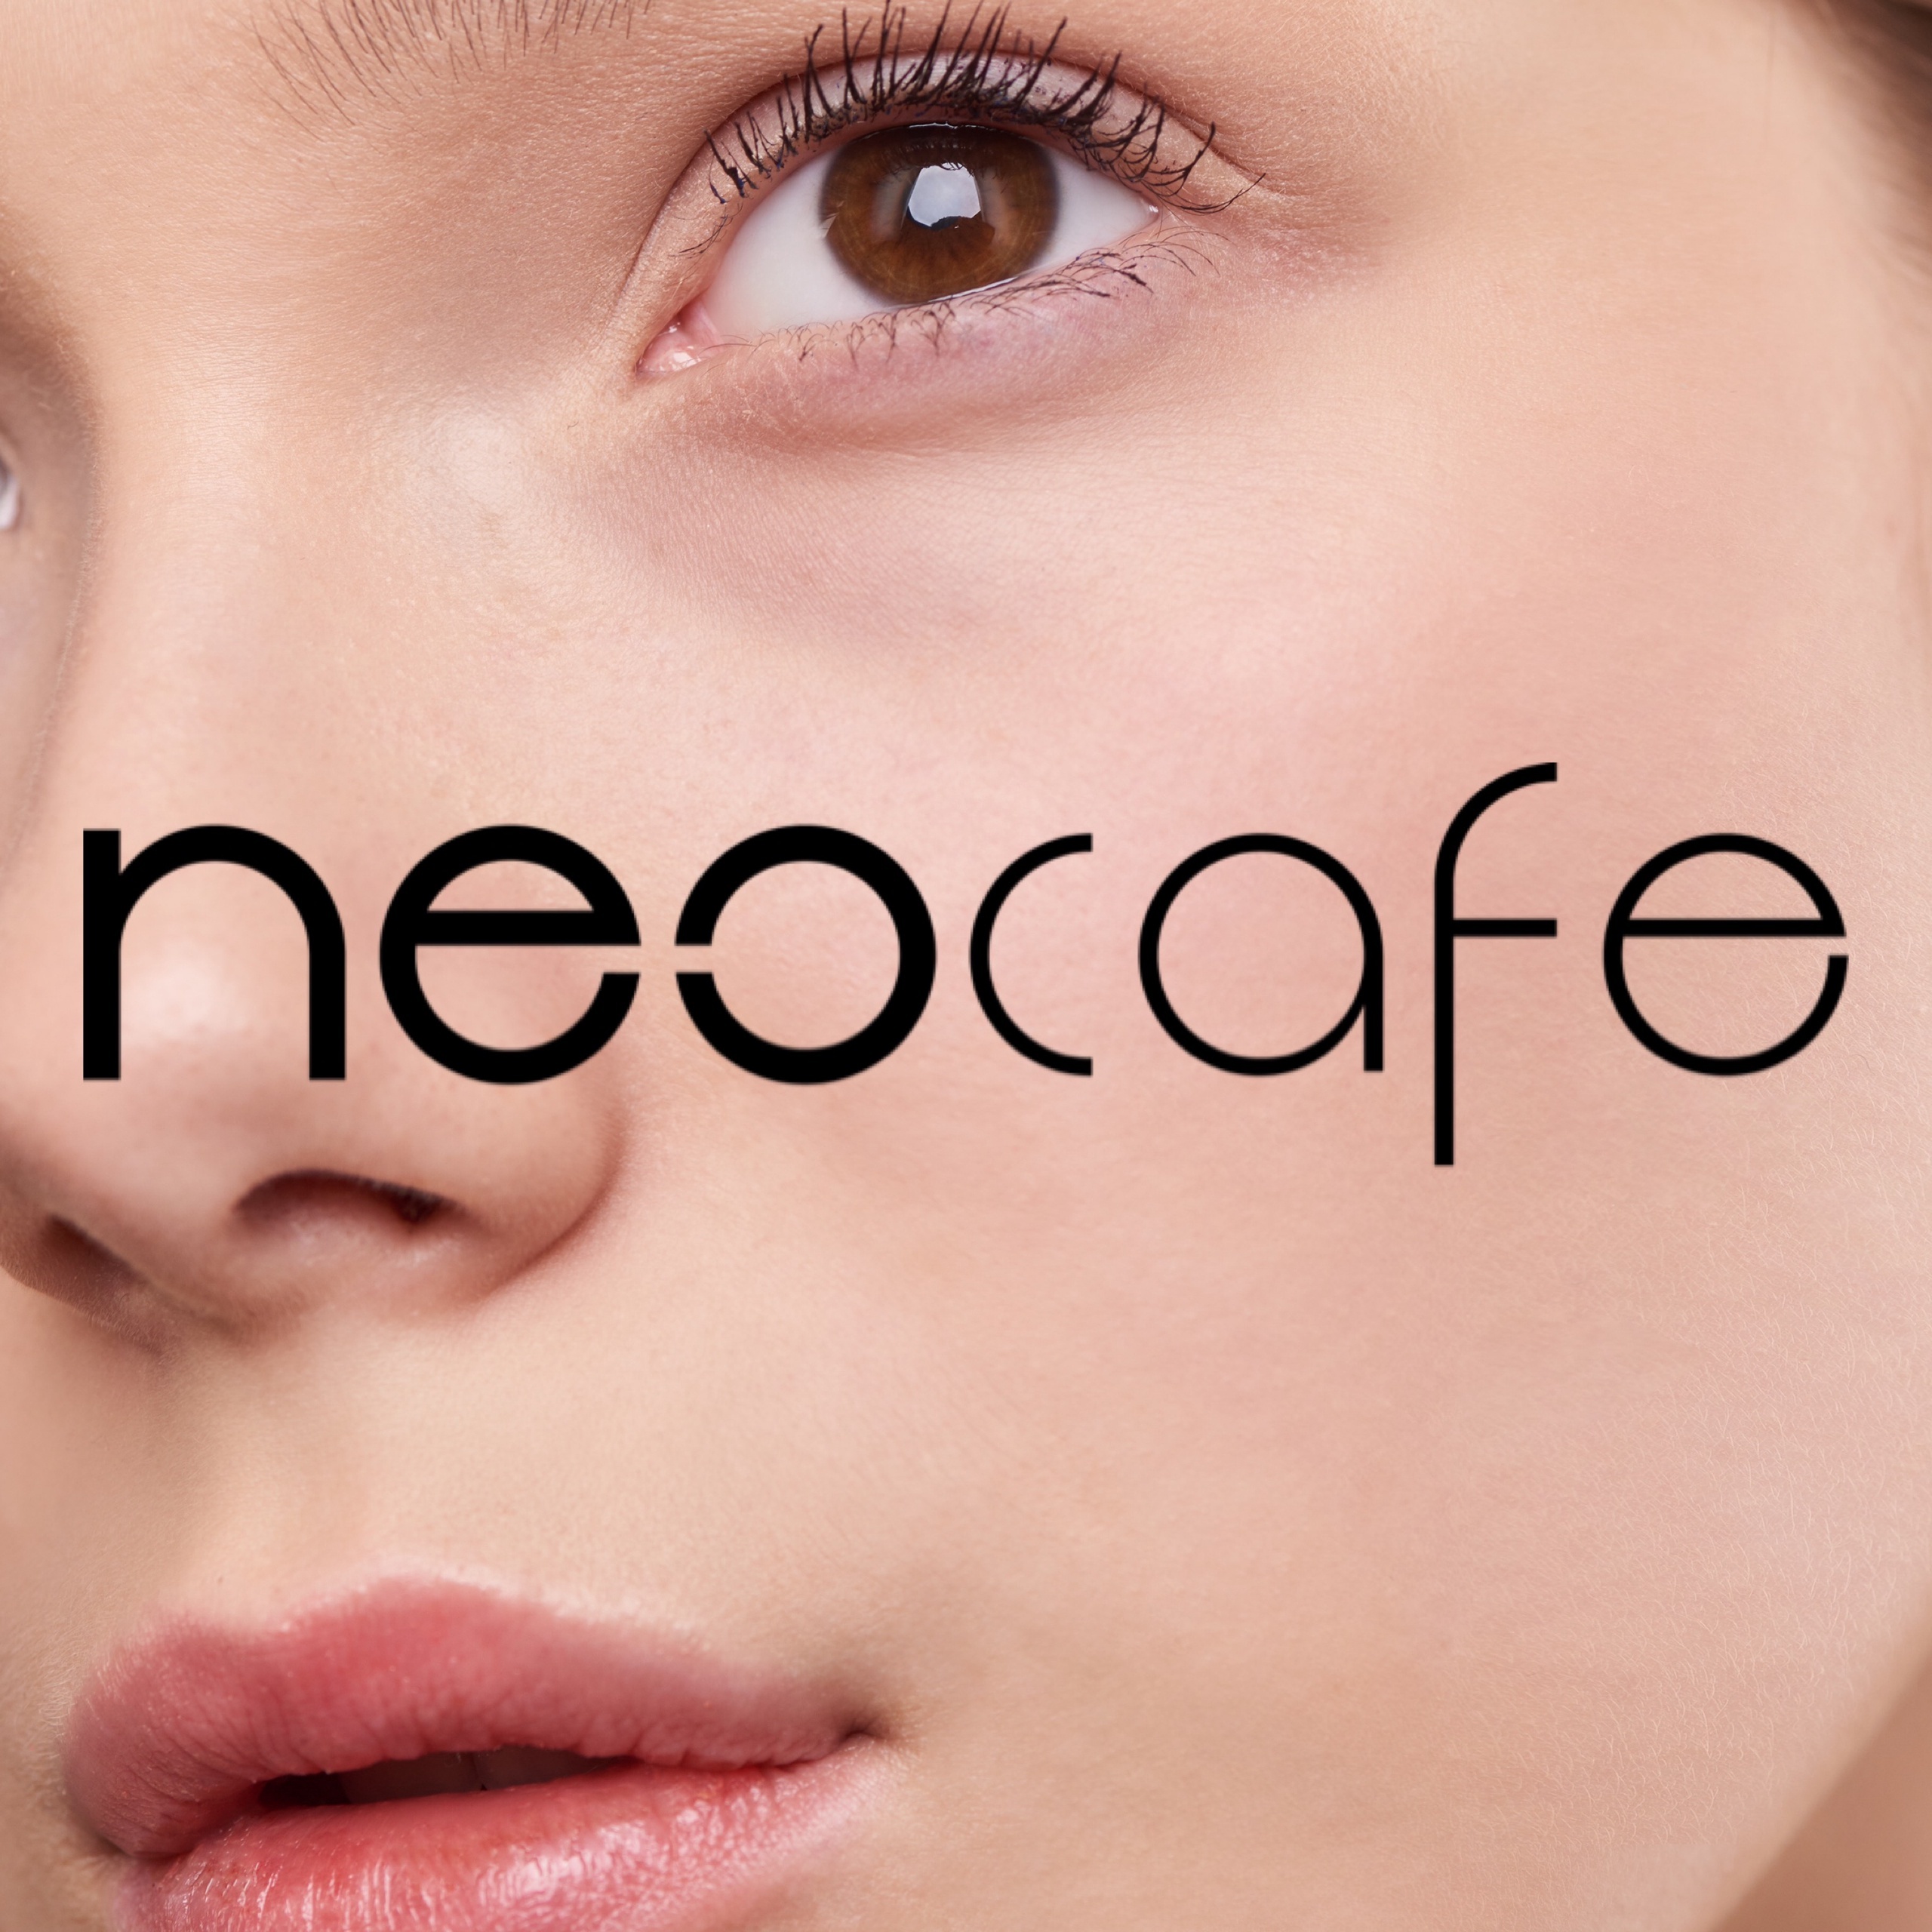 NEOCAFE